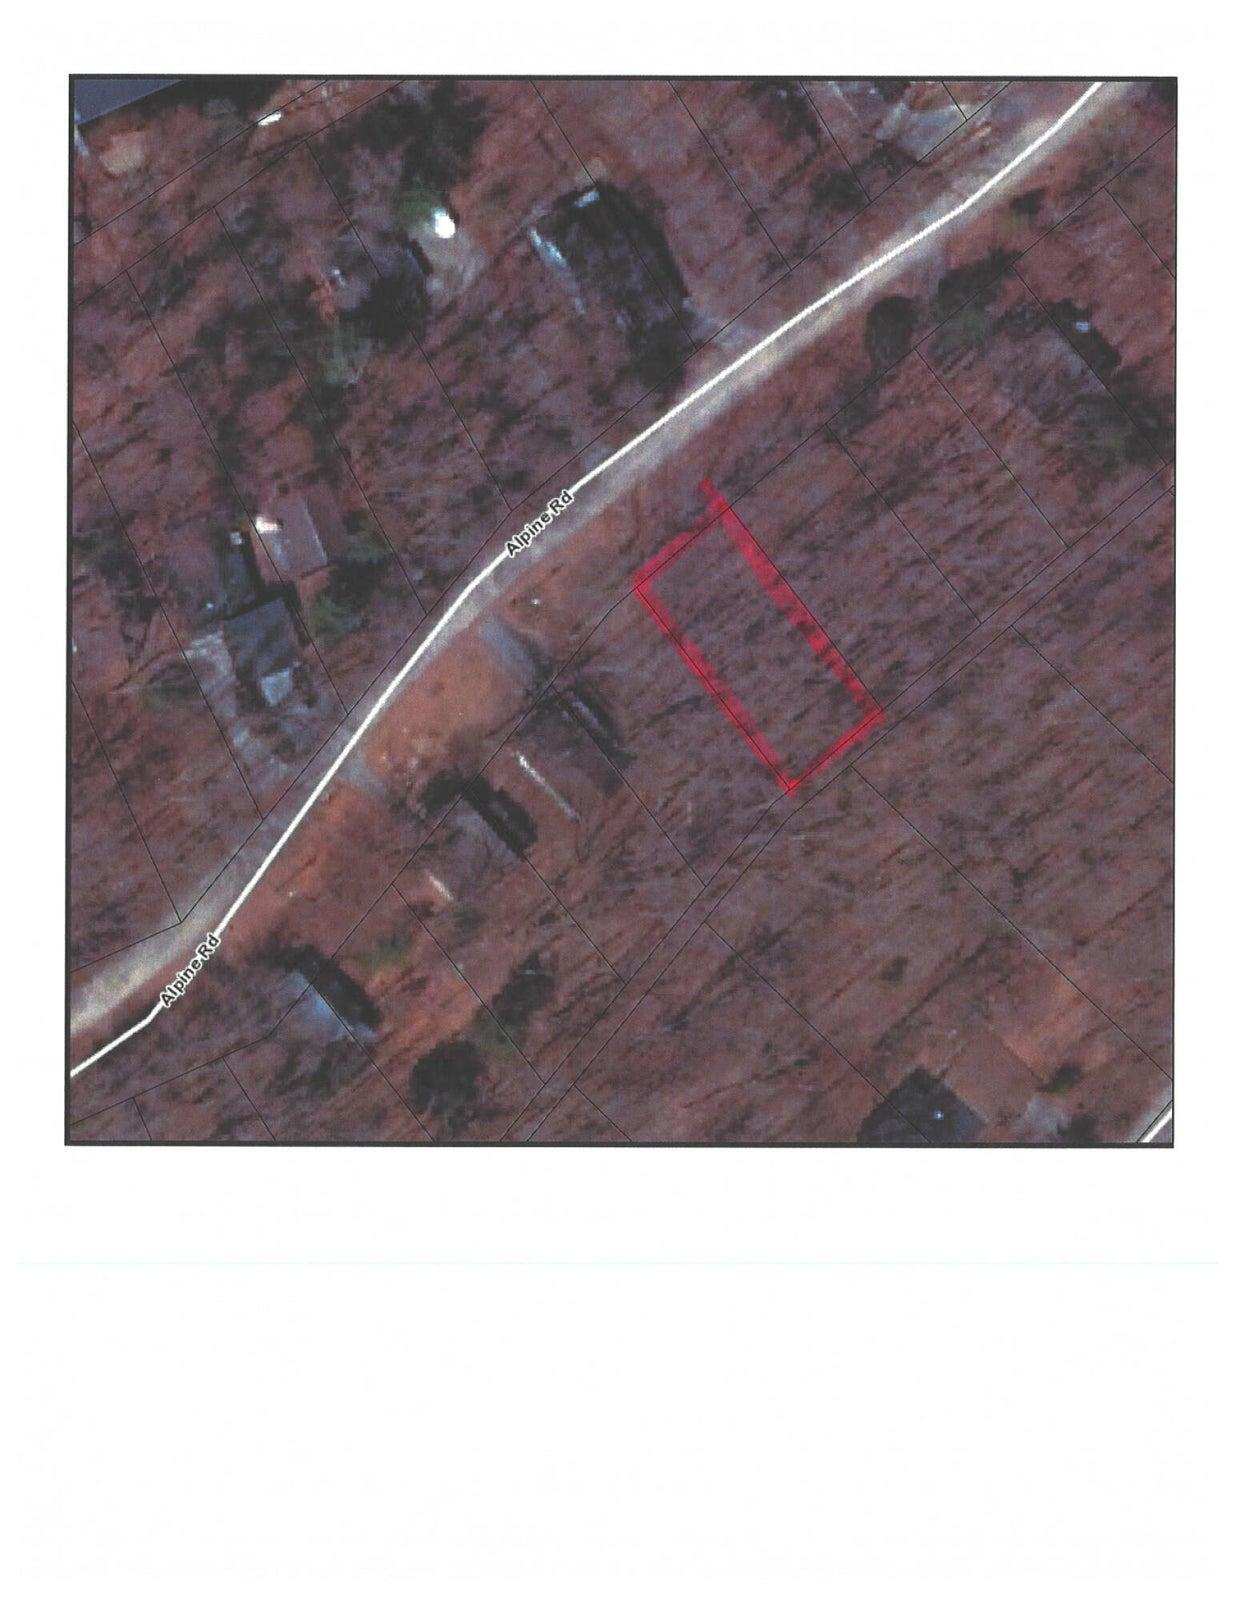 Property Image for 11391 Alpine Rd.